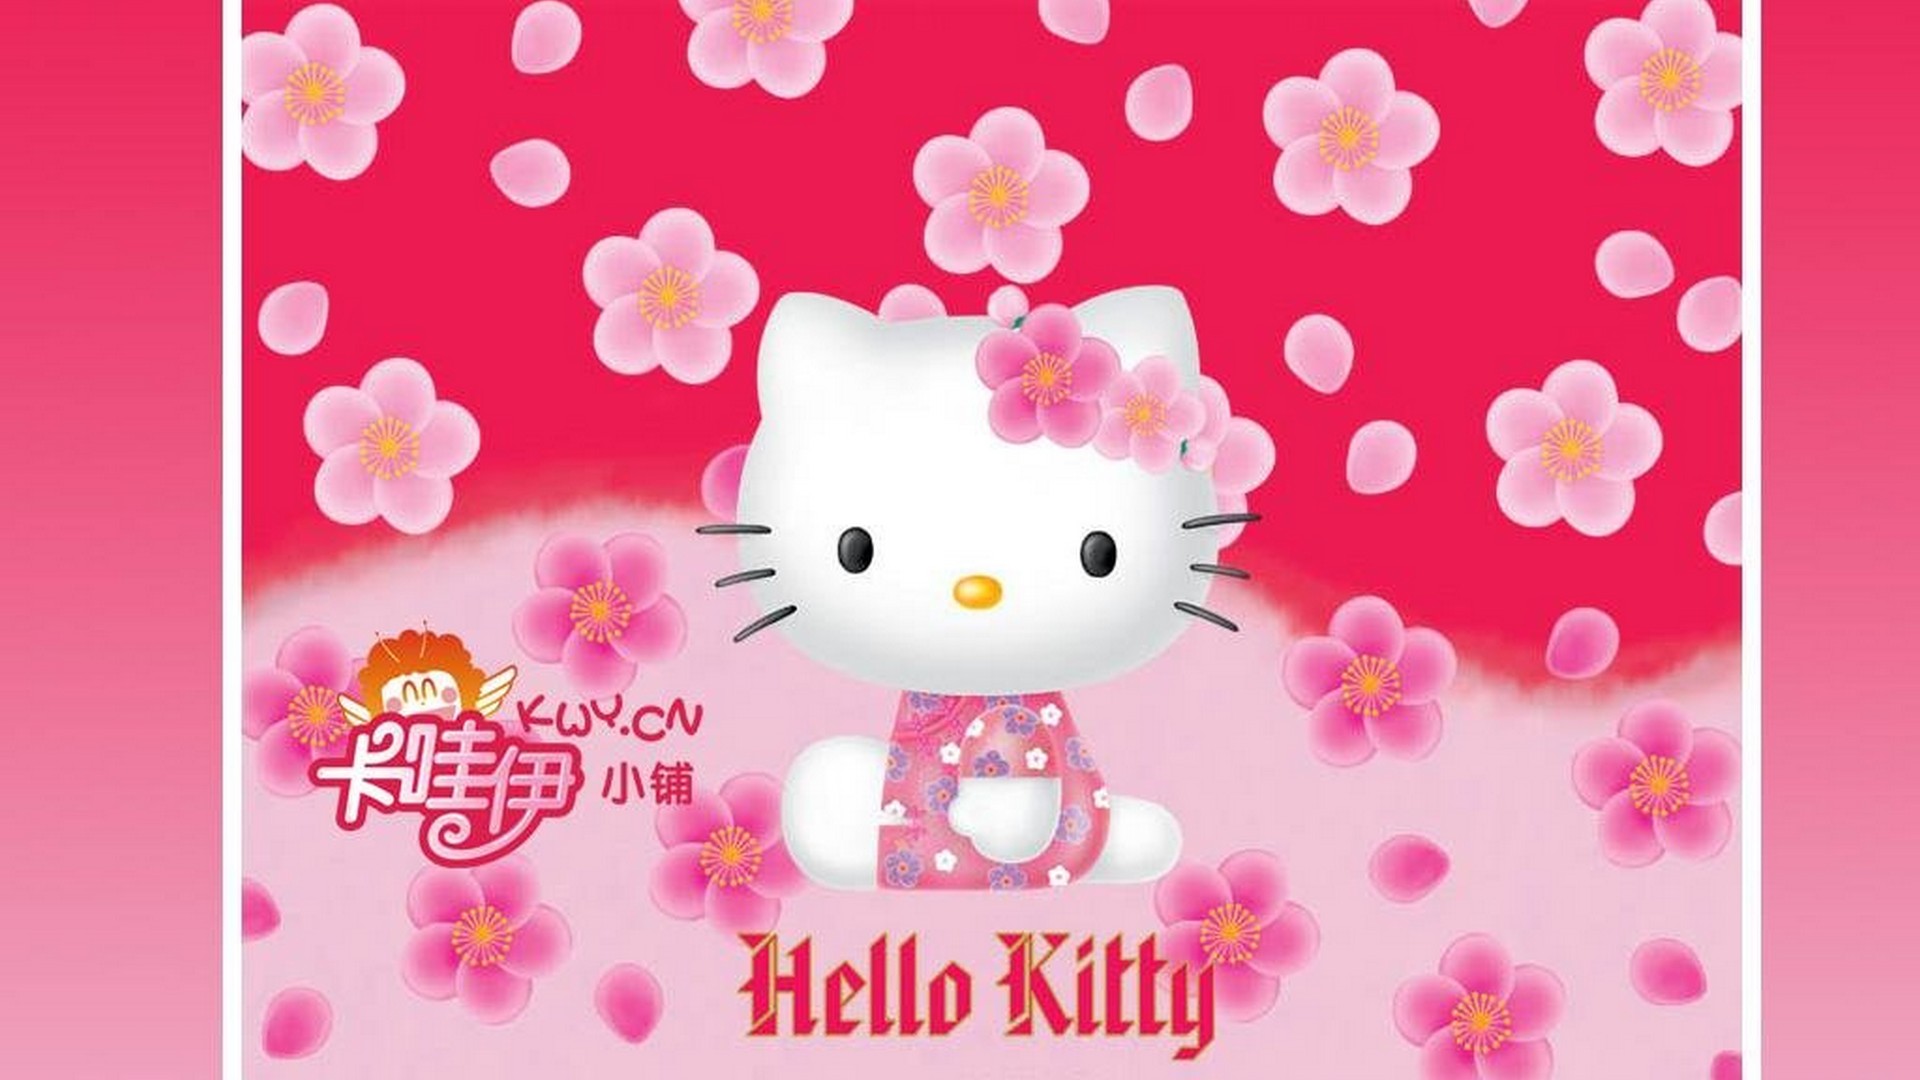 Desktop Wallpaper Hello Kitty Characters with image resolution 1920x1080 pixel. You can use this wallpaper as background for your desktop Computer Screensavers, Android or iPhone smartphones